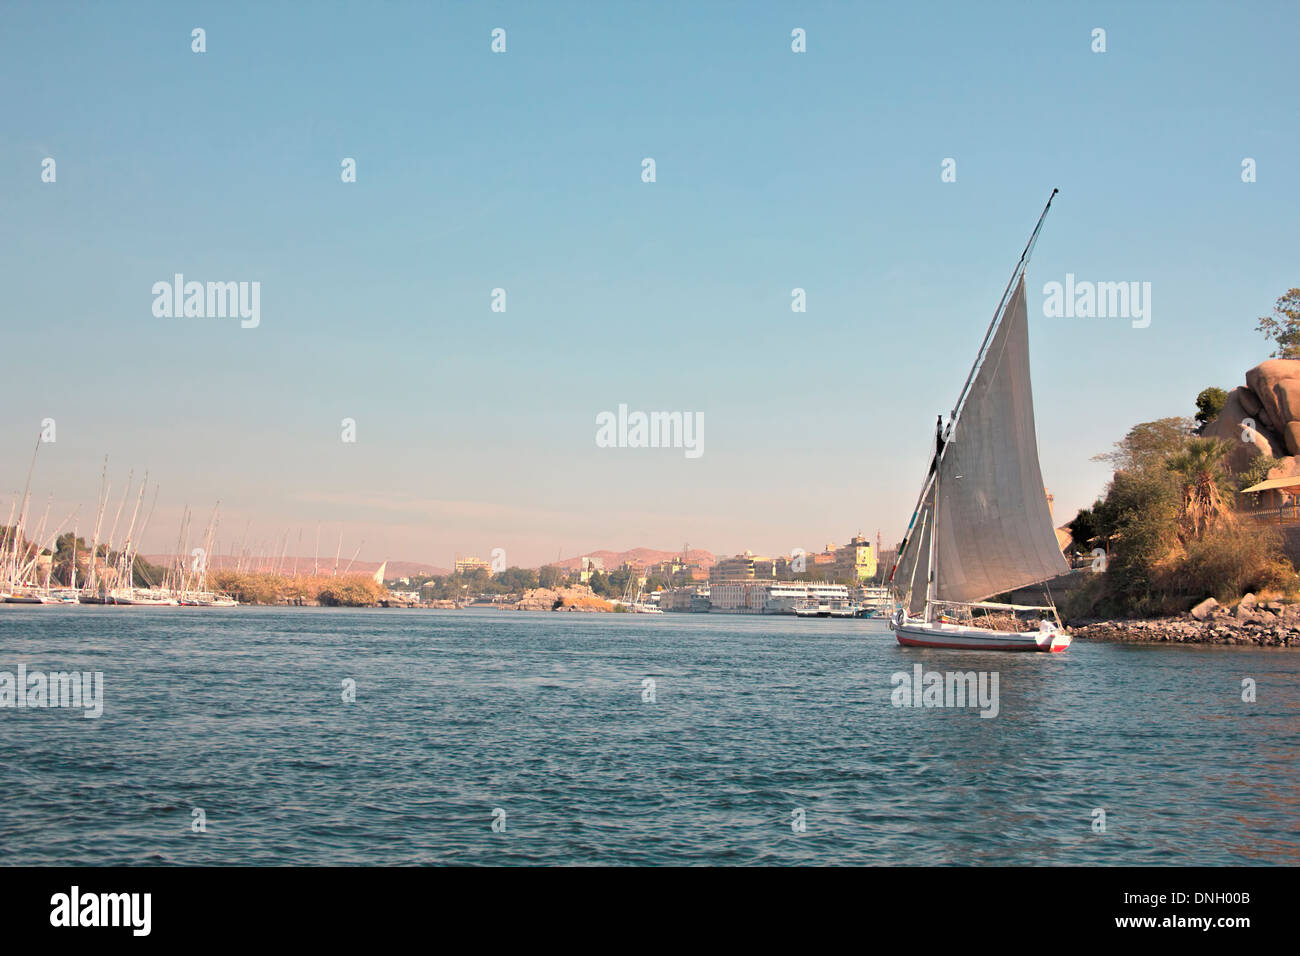 Traditional Felucca Boat sailing on the River Nile around the islands at Aswan, Egypt. Stock Photo